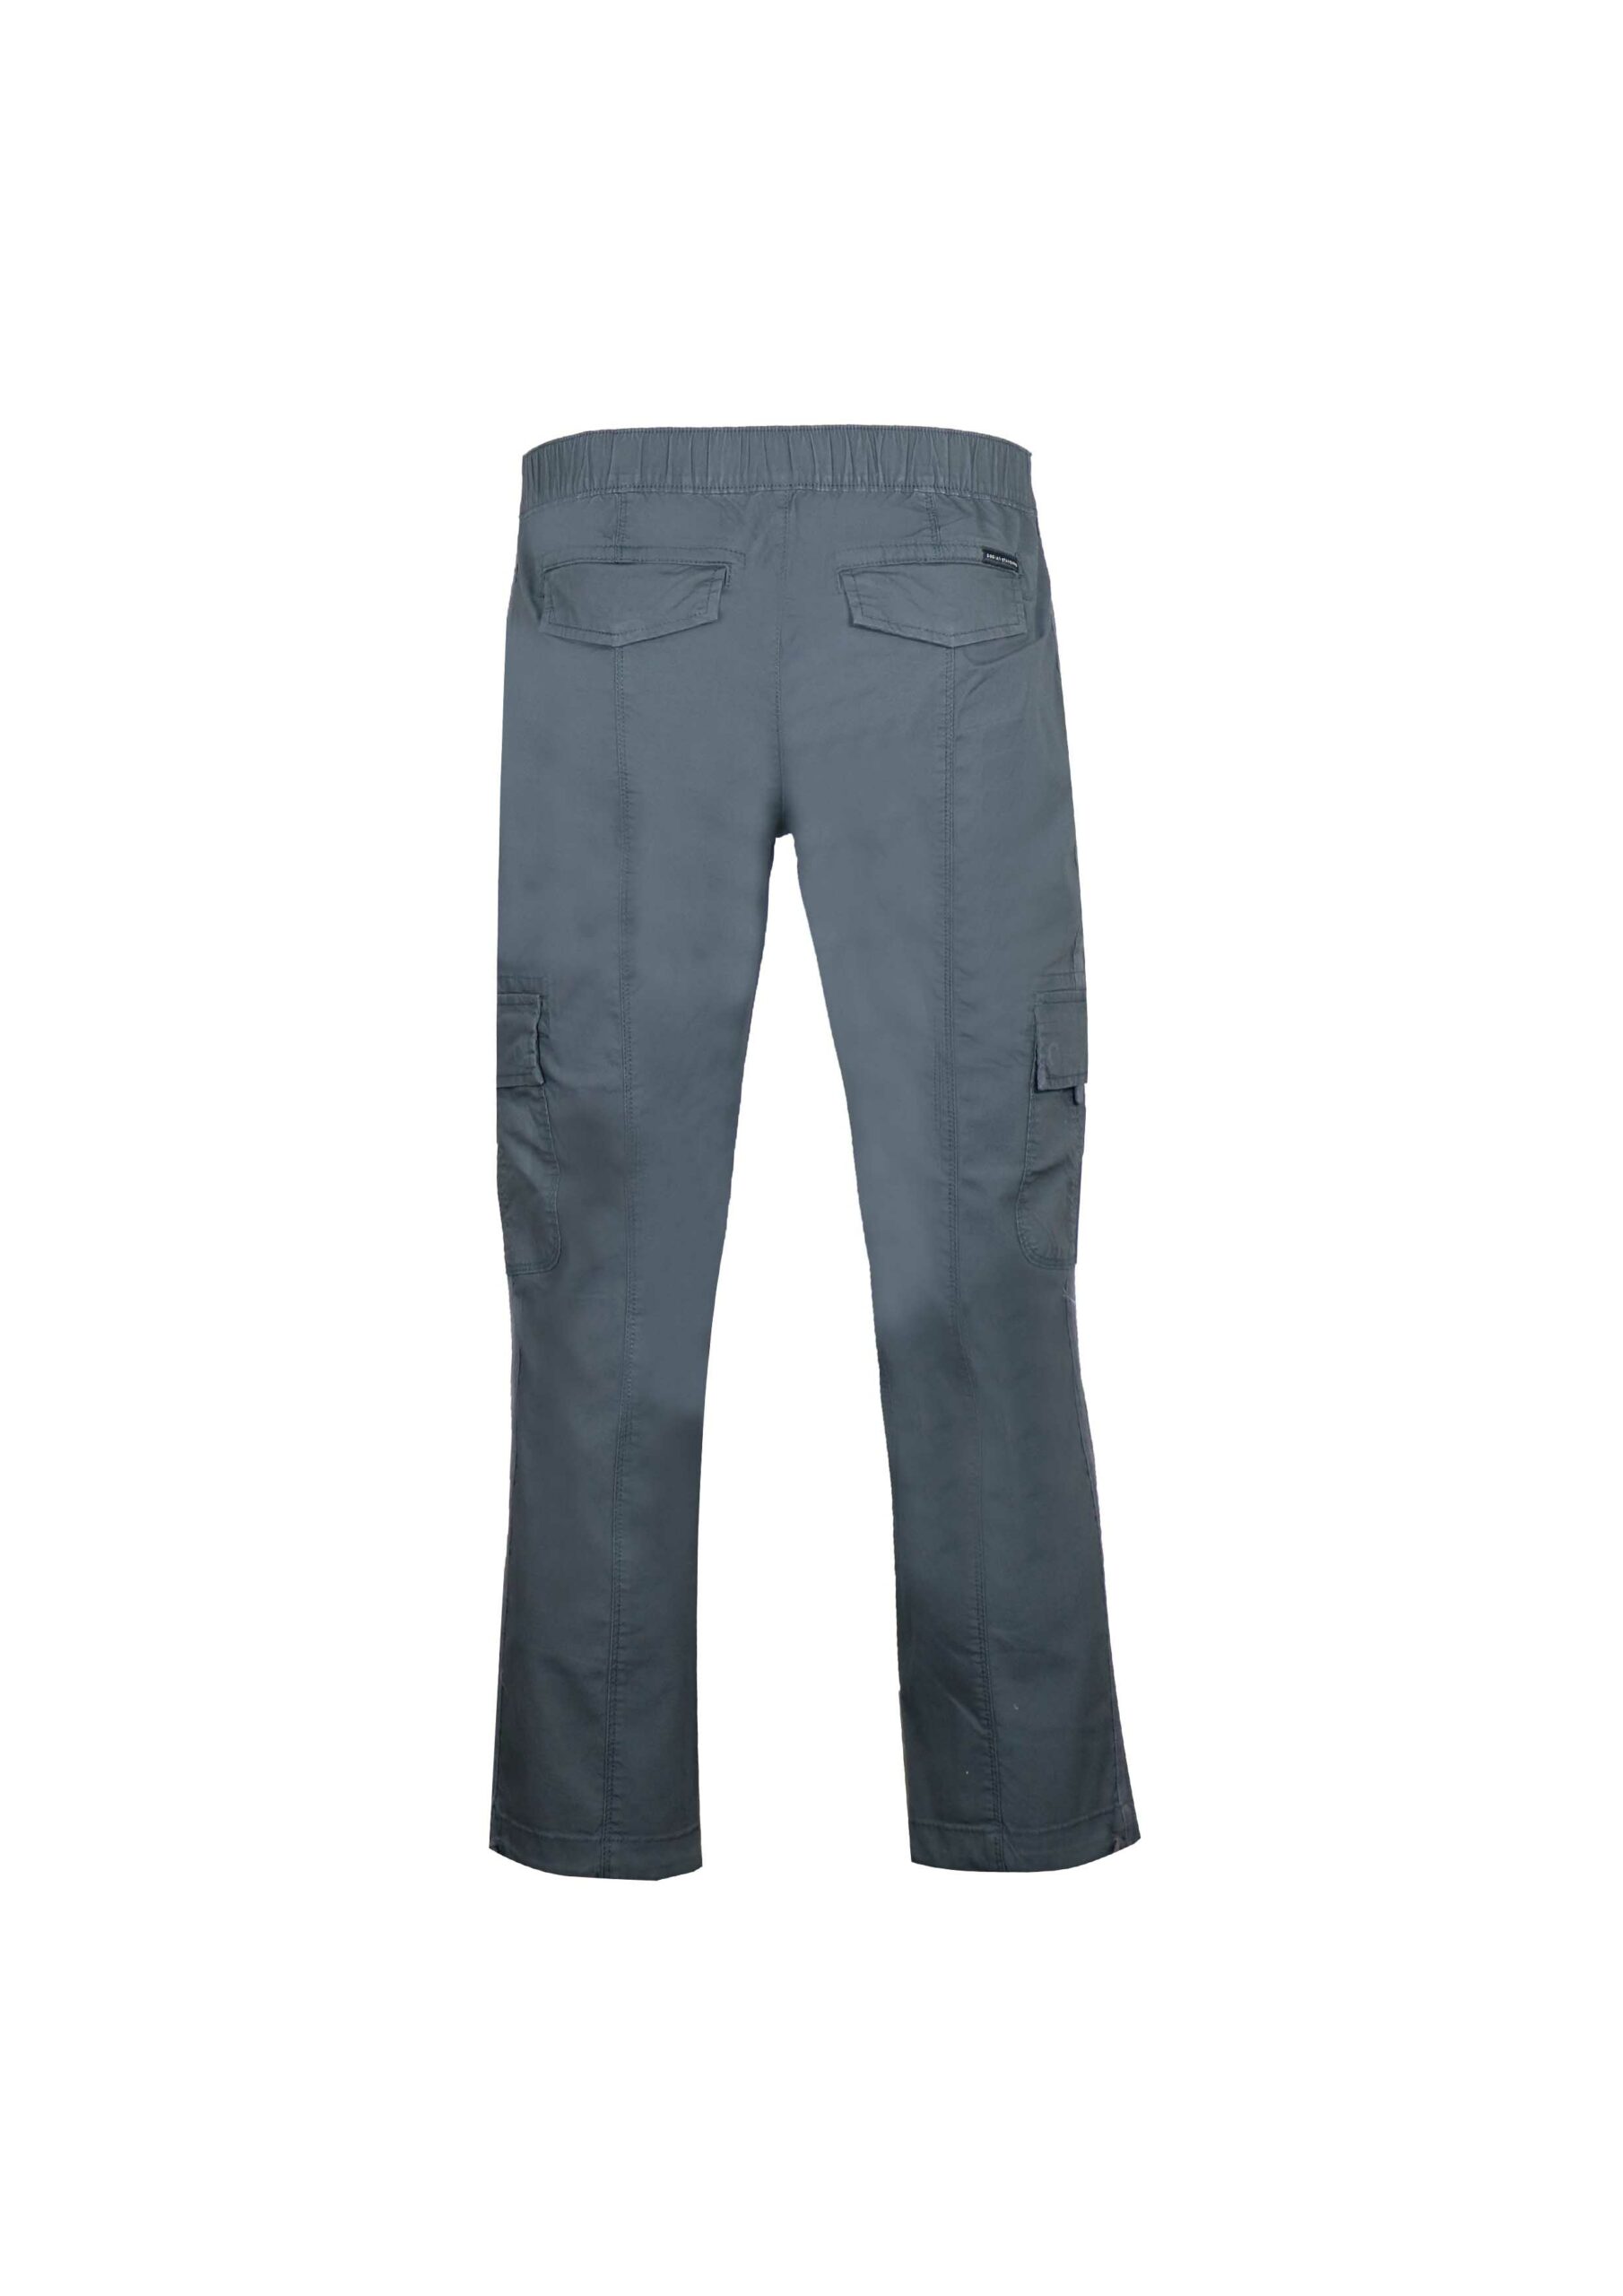 Ladies Trouser - Artisan Outfitters Ltd